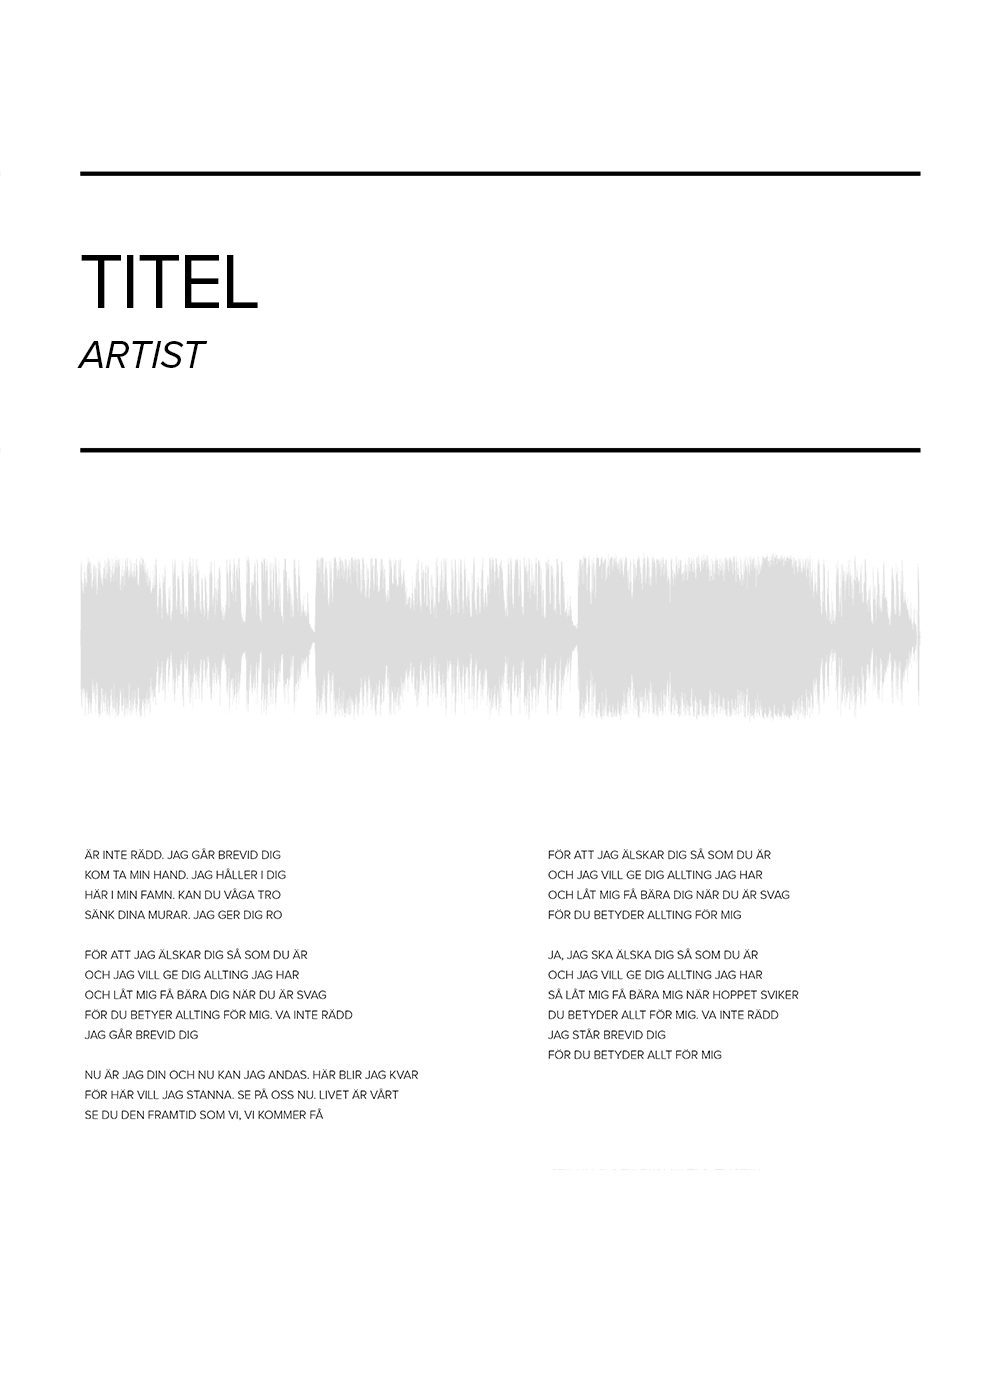 låttext poster